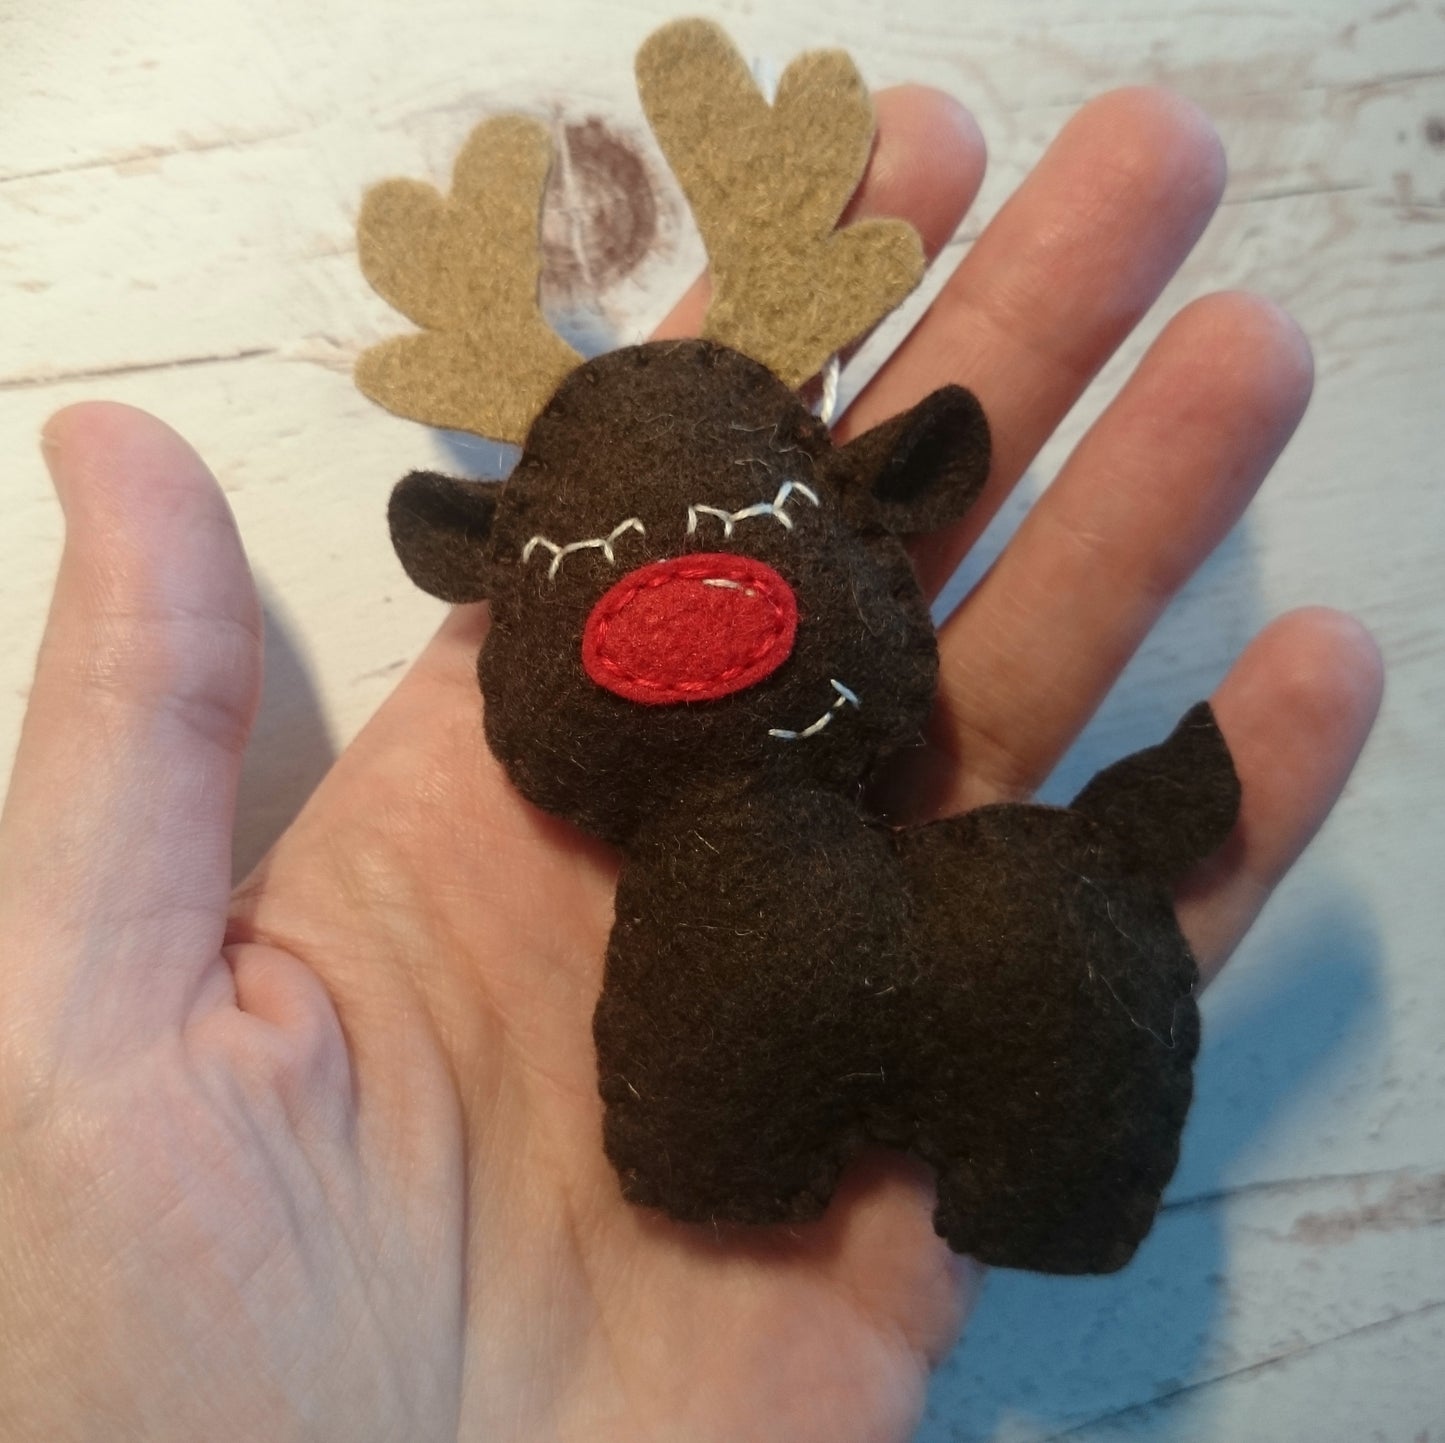 Rudolph the red nosed reindeer ornament - Christmas decor